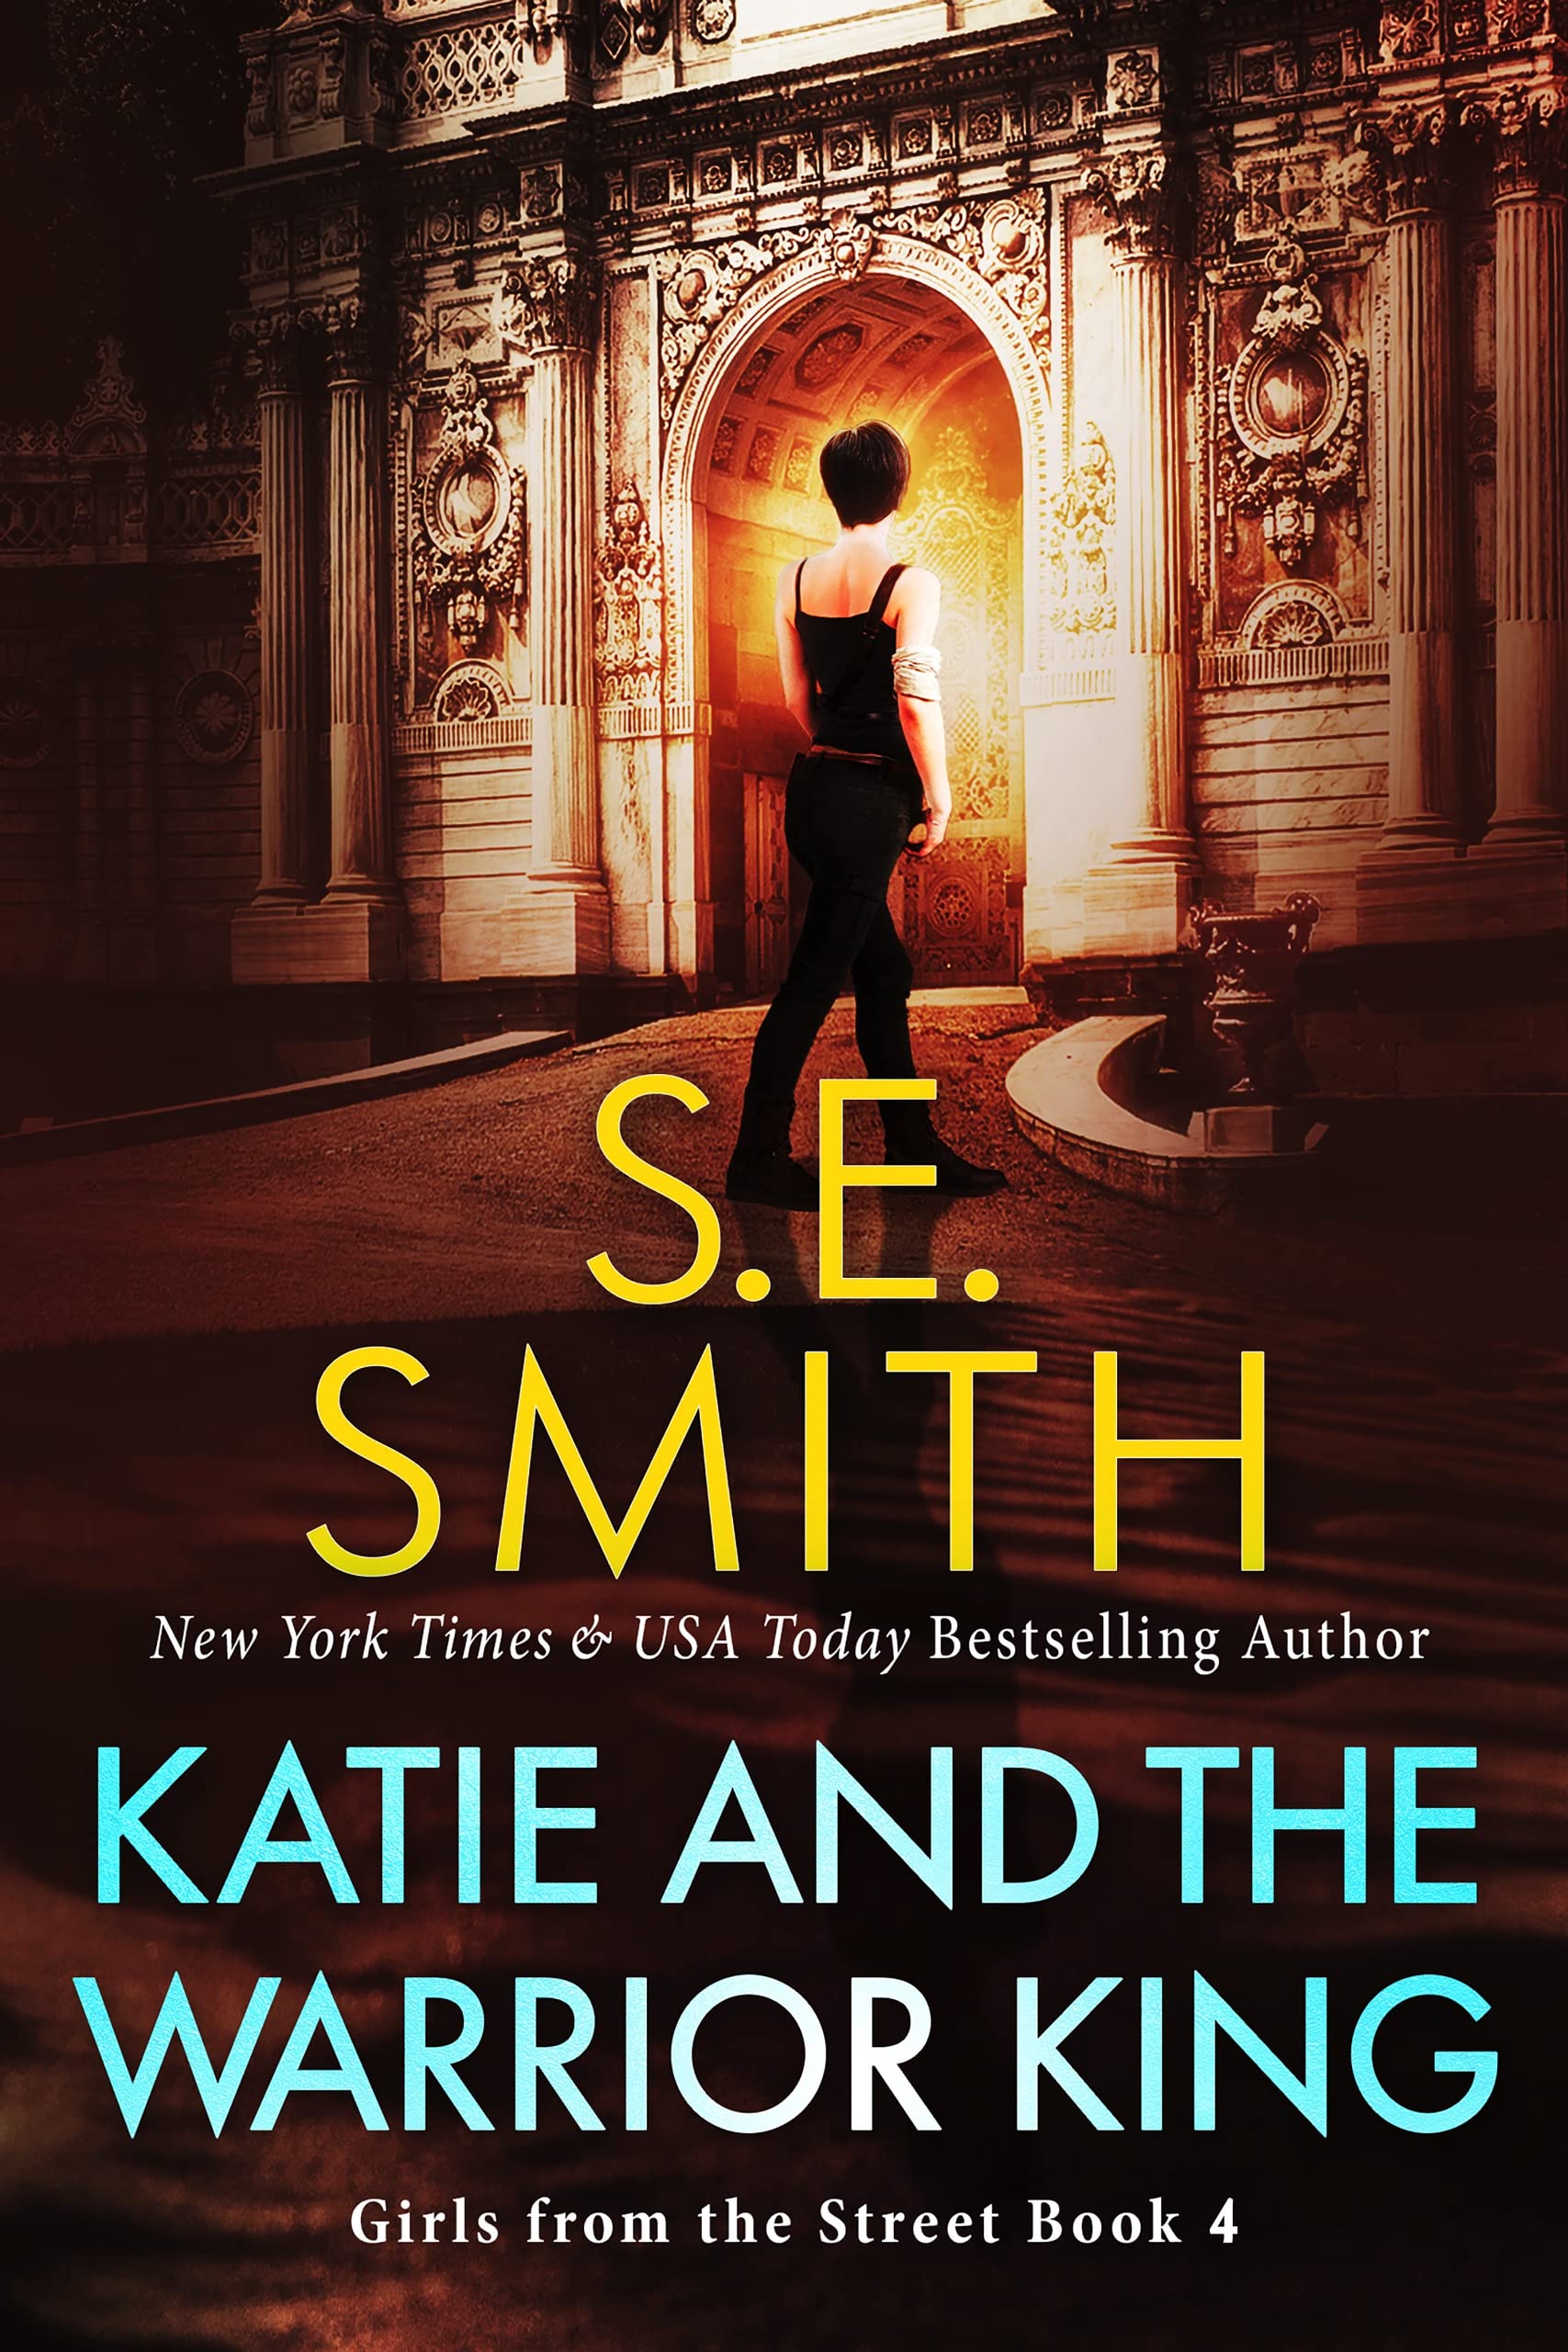 Katie and the Warrior King by S.E. Smith PDF Download